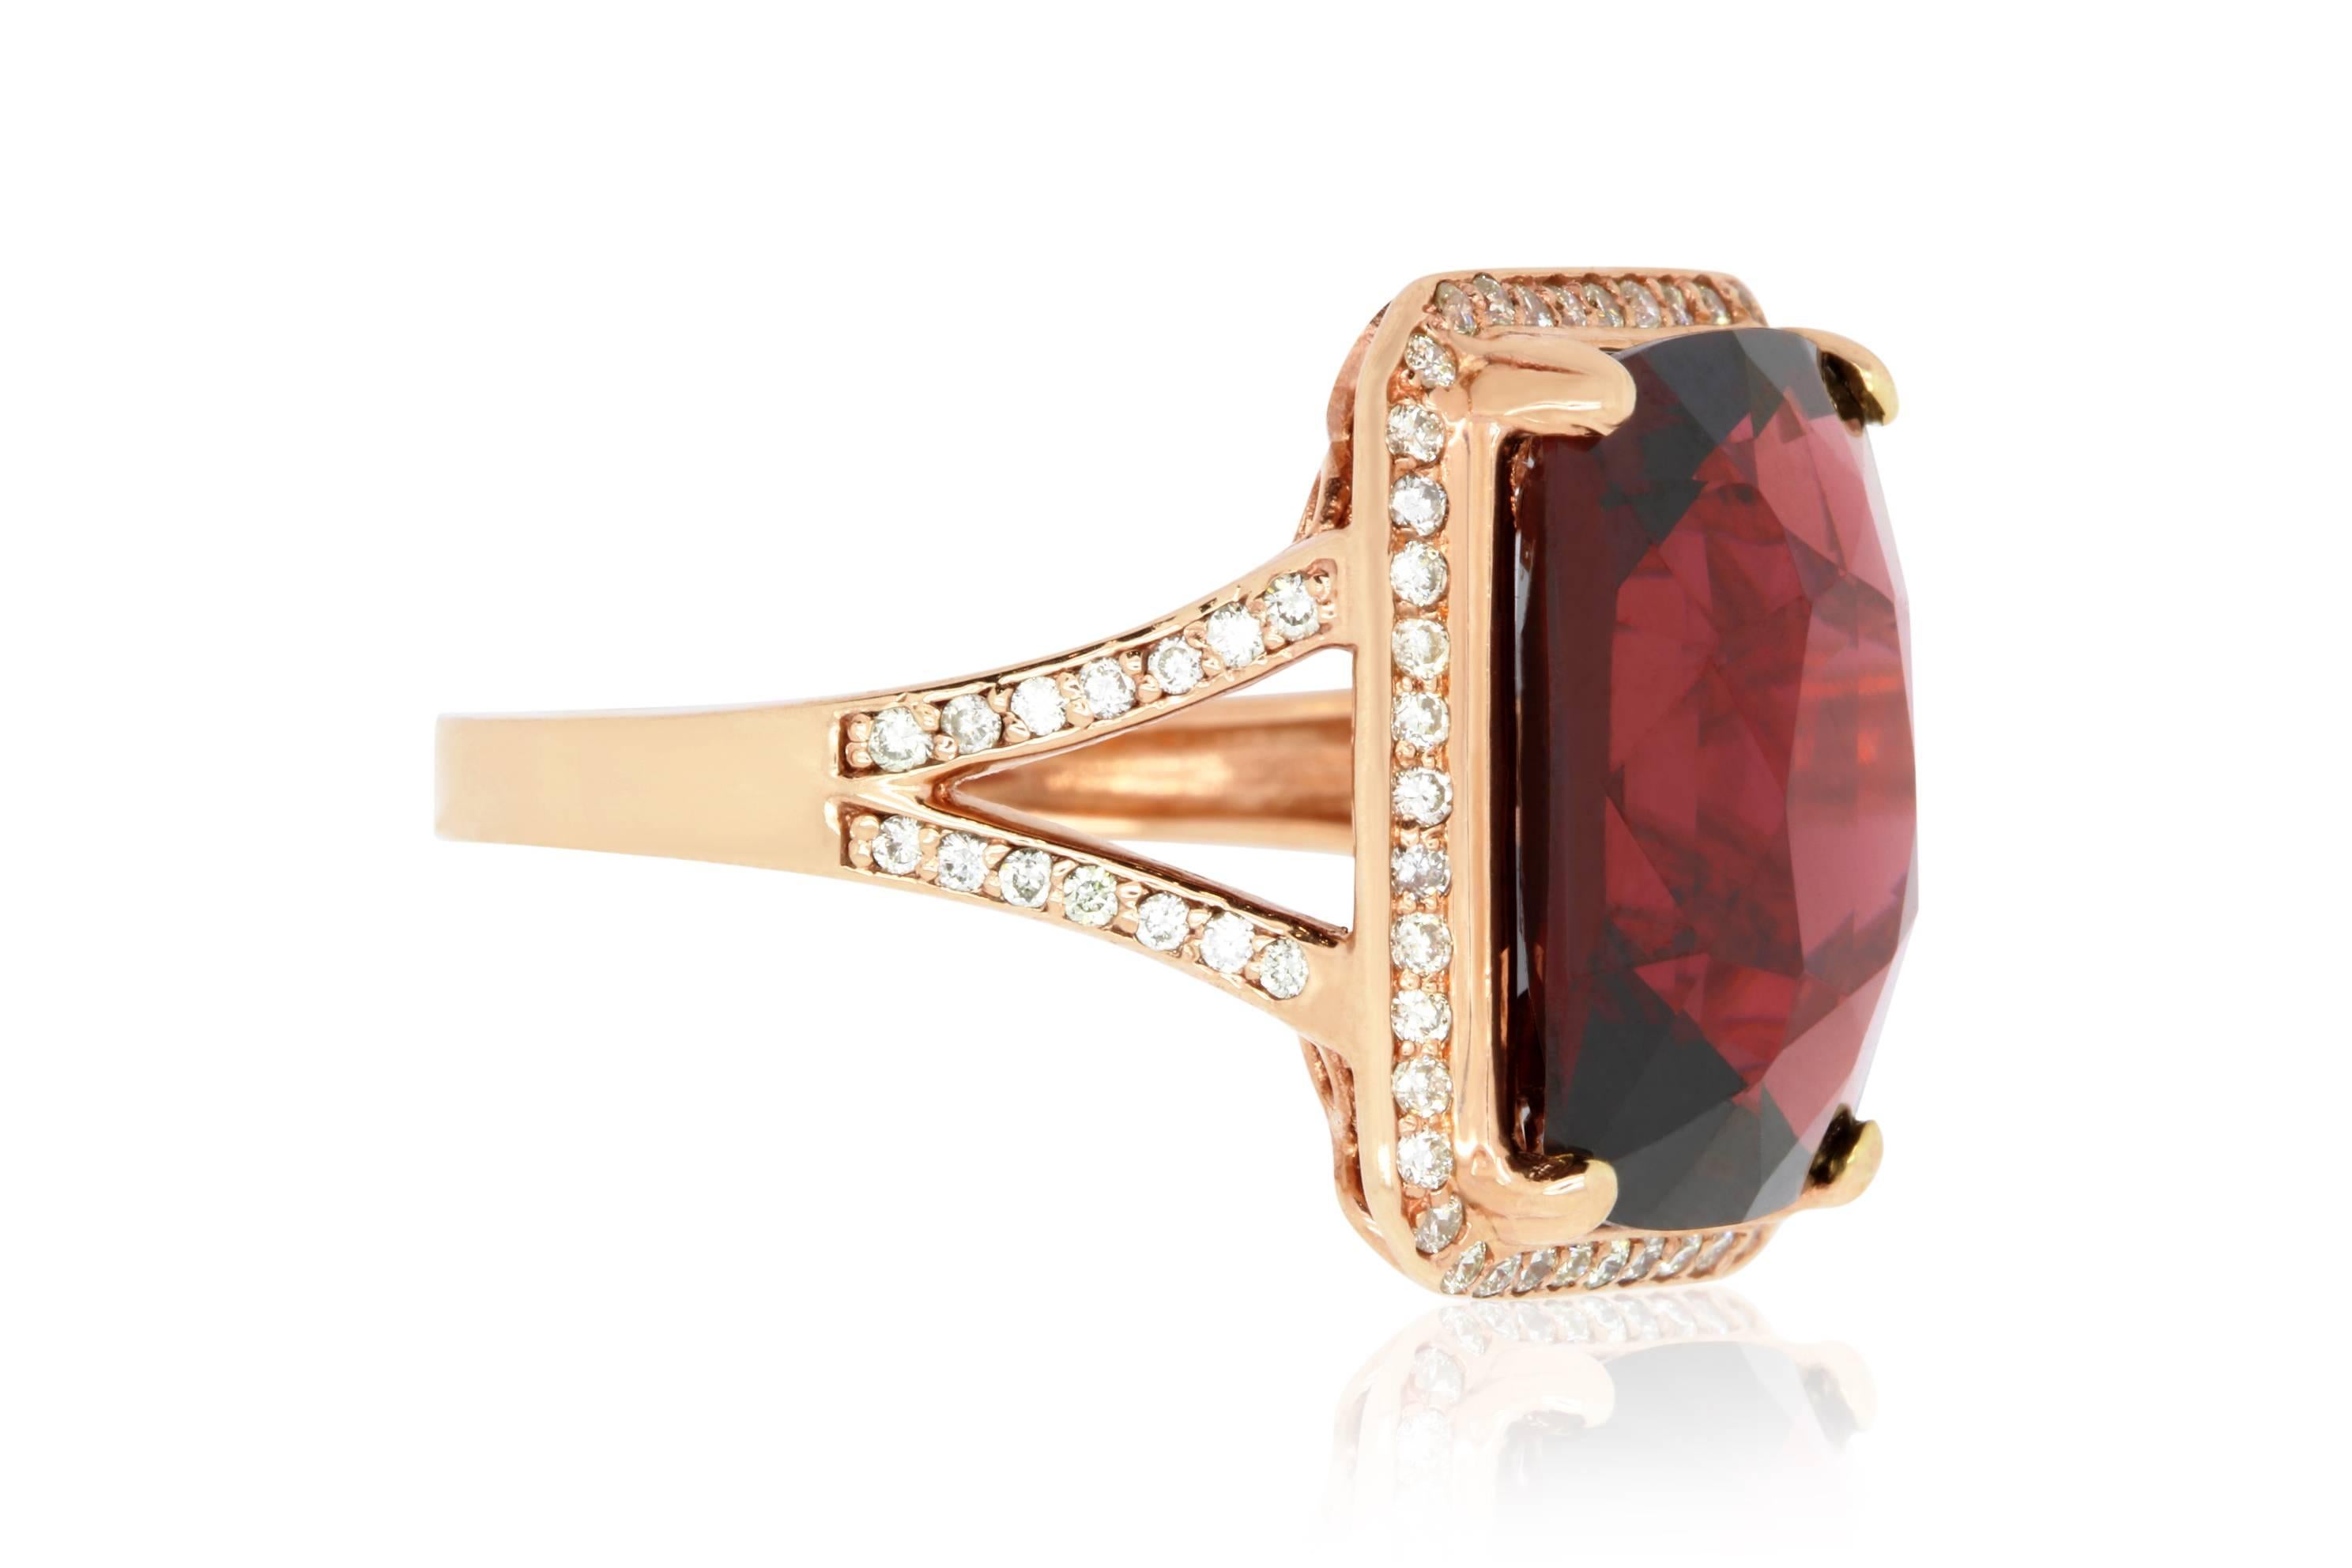 Material: 14k Rose Gold 
Center Stone Details: 12.74 Carat Rhodolite Garnet - 12.6 x 15.9 mm
Mounting Diamond Details: 72 Round White Diamonds Approximately 0.45 Carats - Clarity: SI / Color: H-I
Ring Size: Size 7 (can be sized)

Fine one-of-a kind